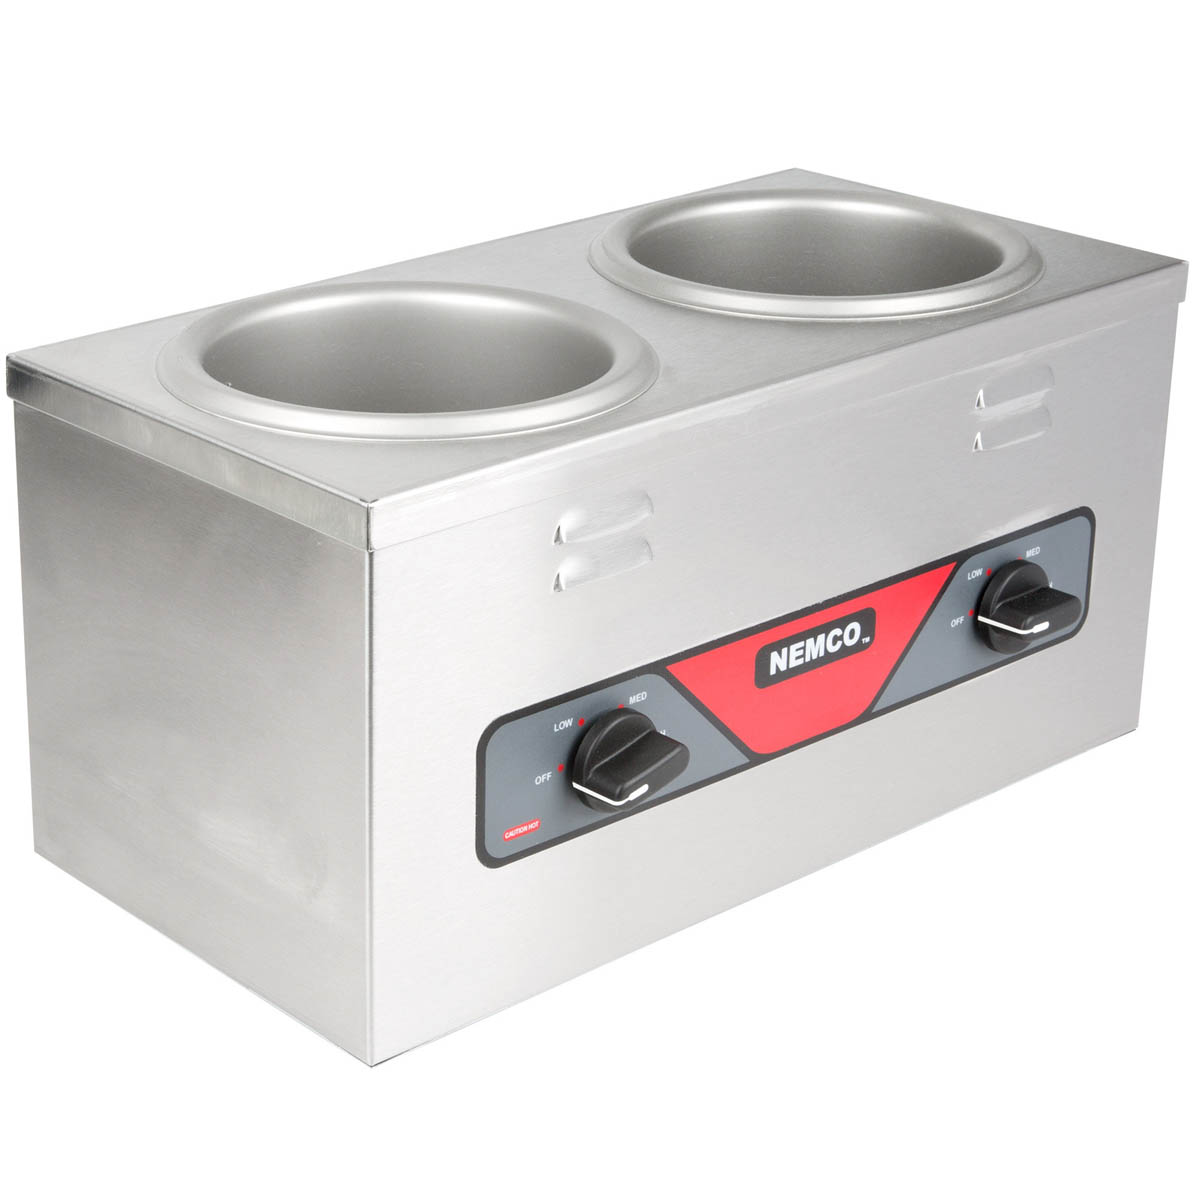 Nemco 6120A-230 Countertop Food Pan Warmer w/ 4-Qt., Adjustable Thermostat, 2 Wells